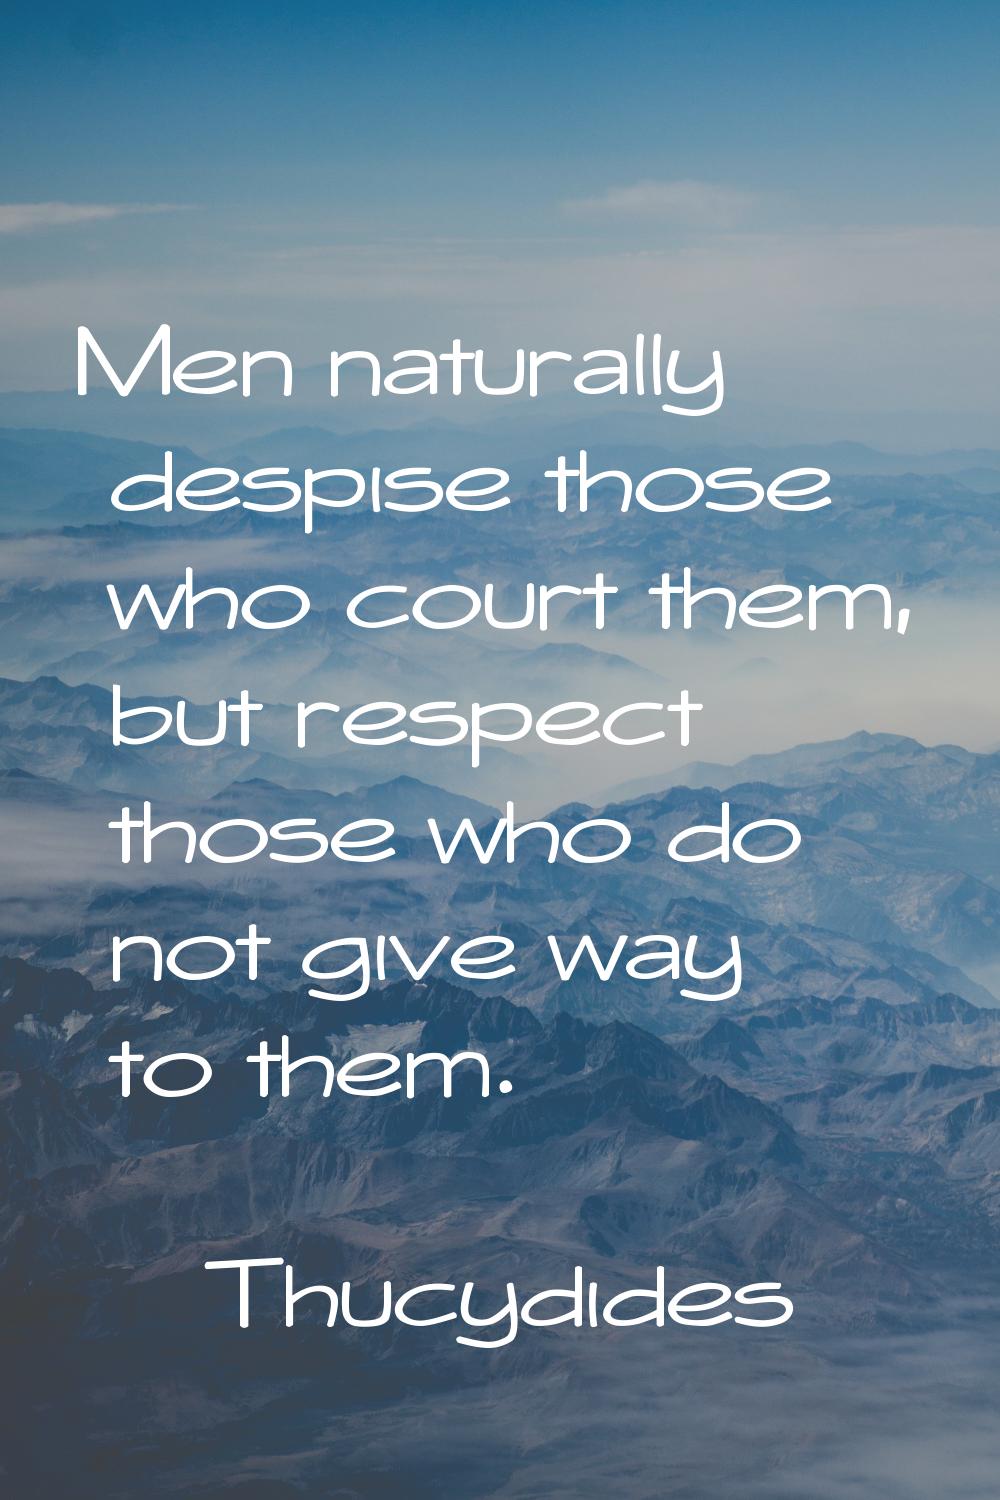 Men naturally despise those who court them, but respect those who do not give way to them.